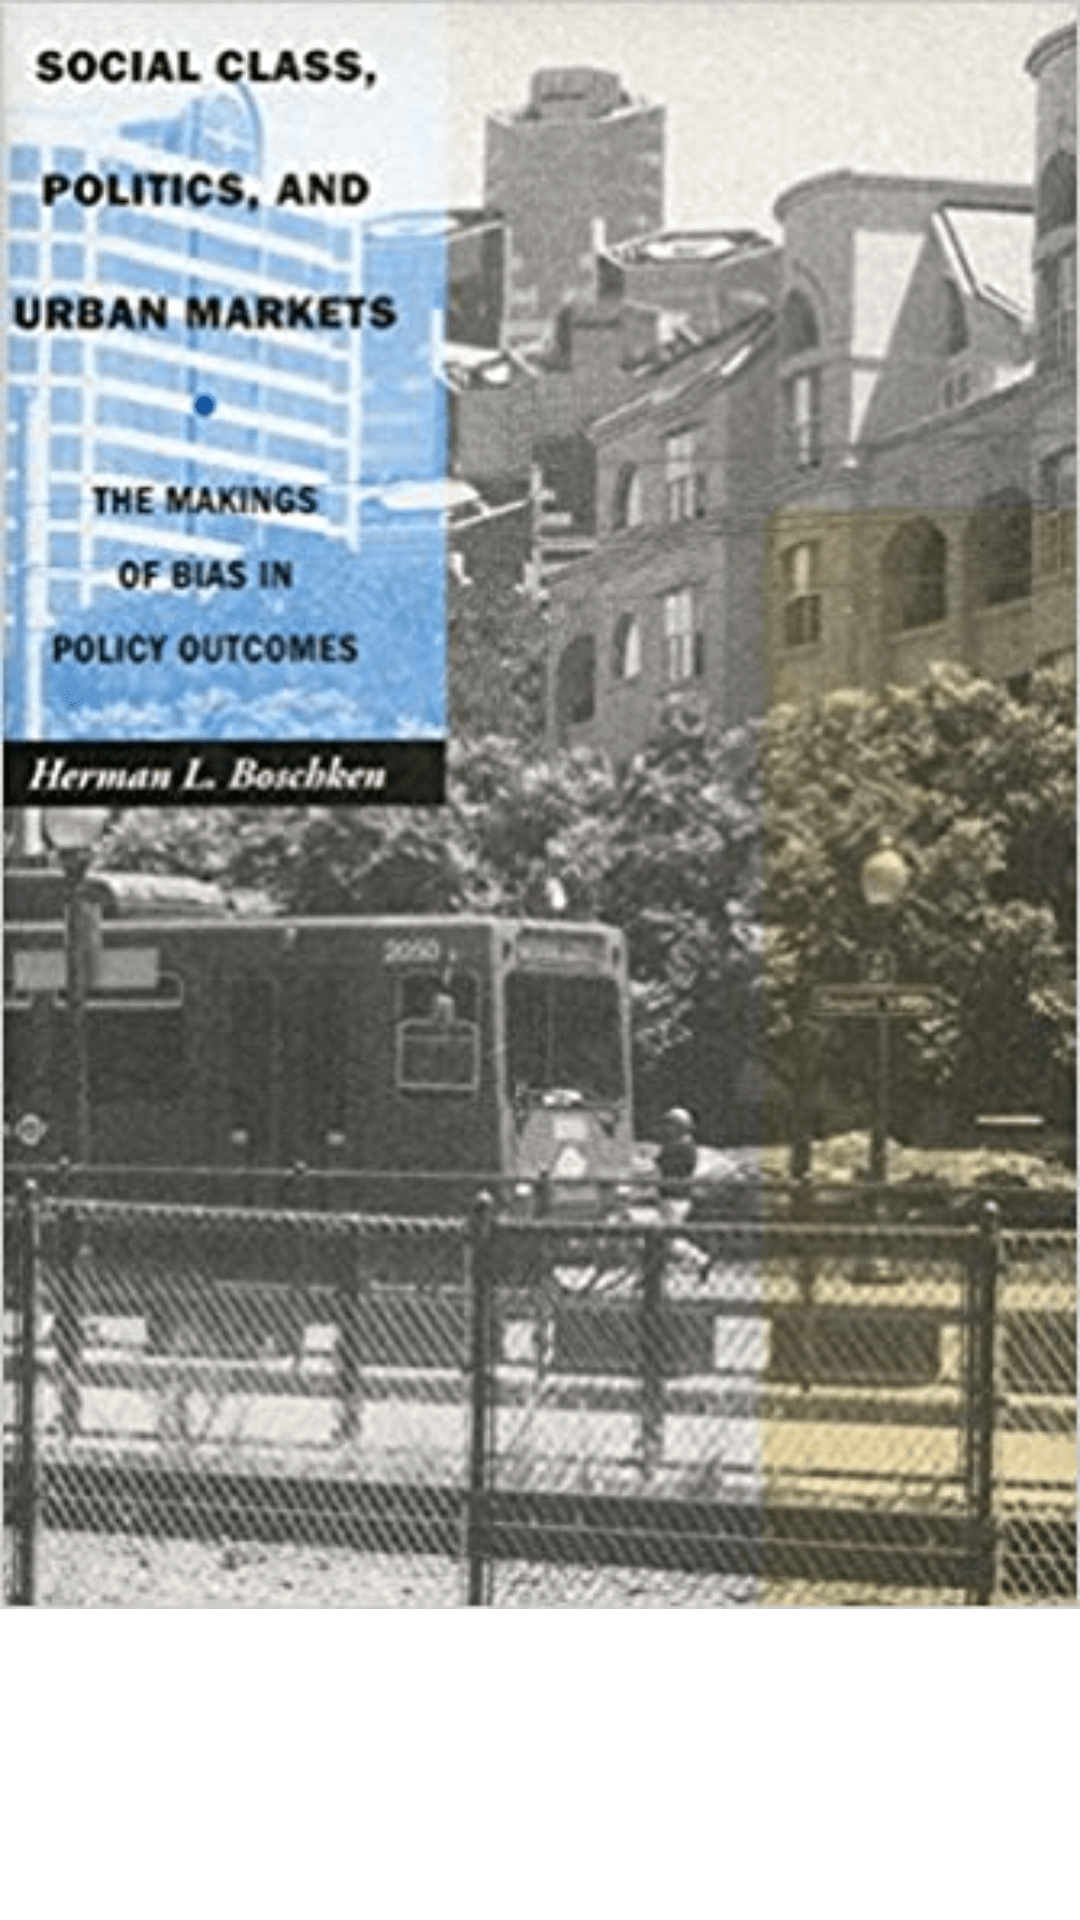 Social Class, Politics, and Urban Markets: The Makings of Bias in Policy Outcomes